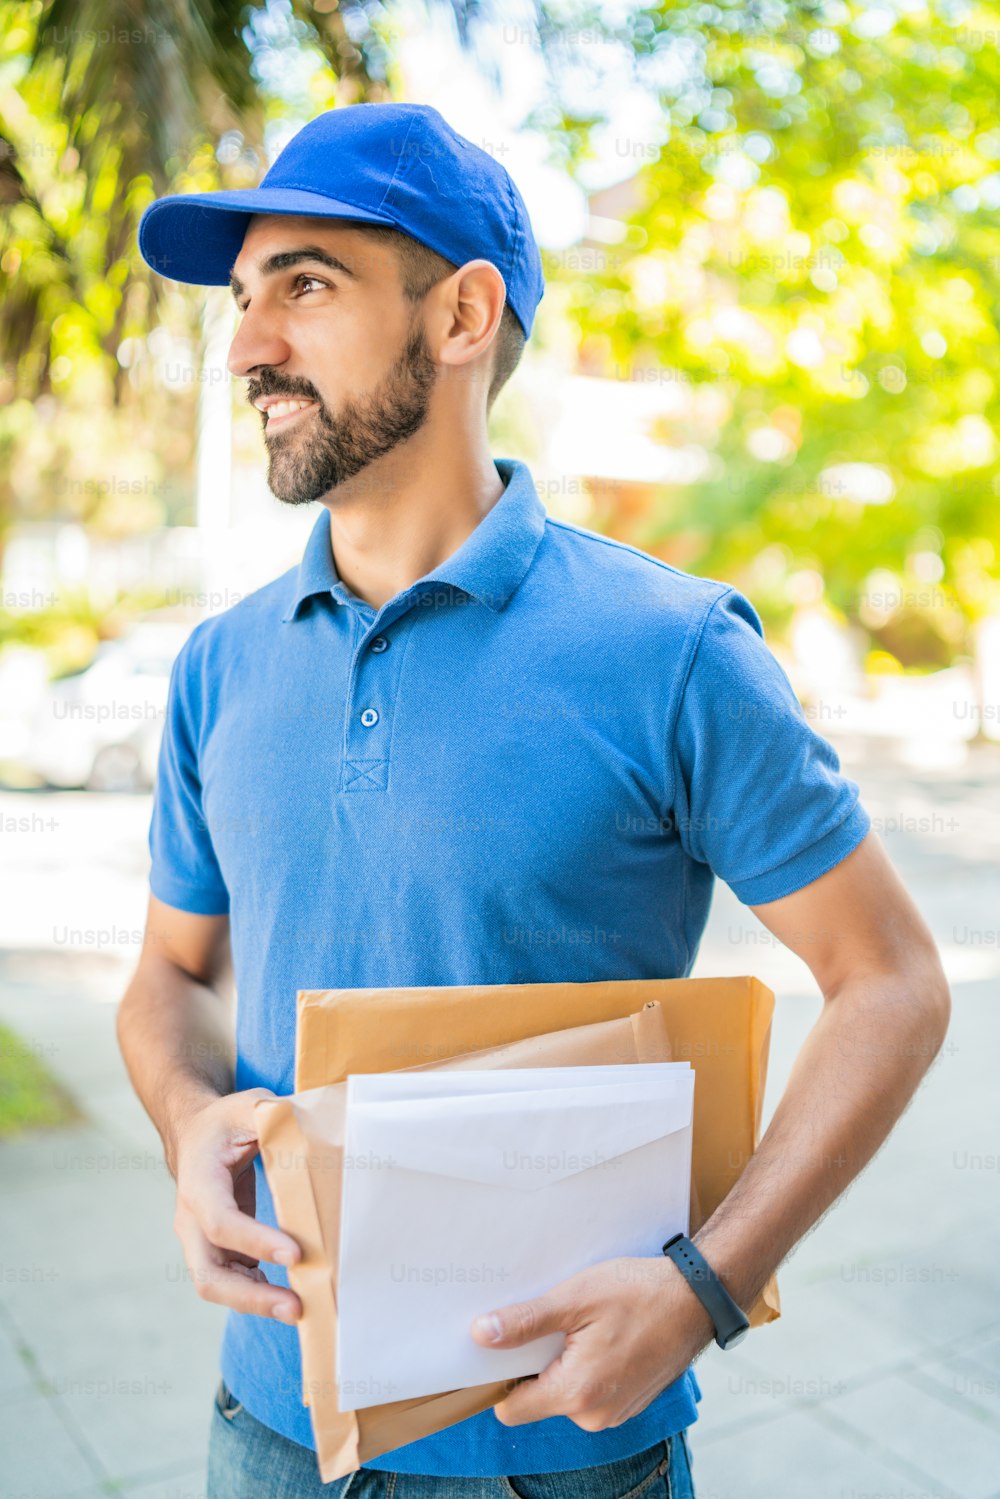 Close-up of a postman carrying packages and letters outdoors in the street. Delivery postal service concept.